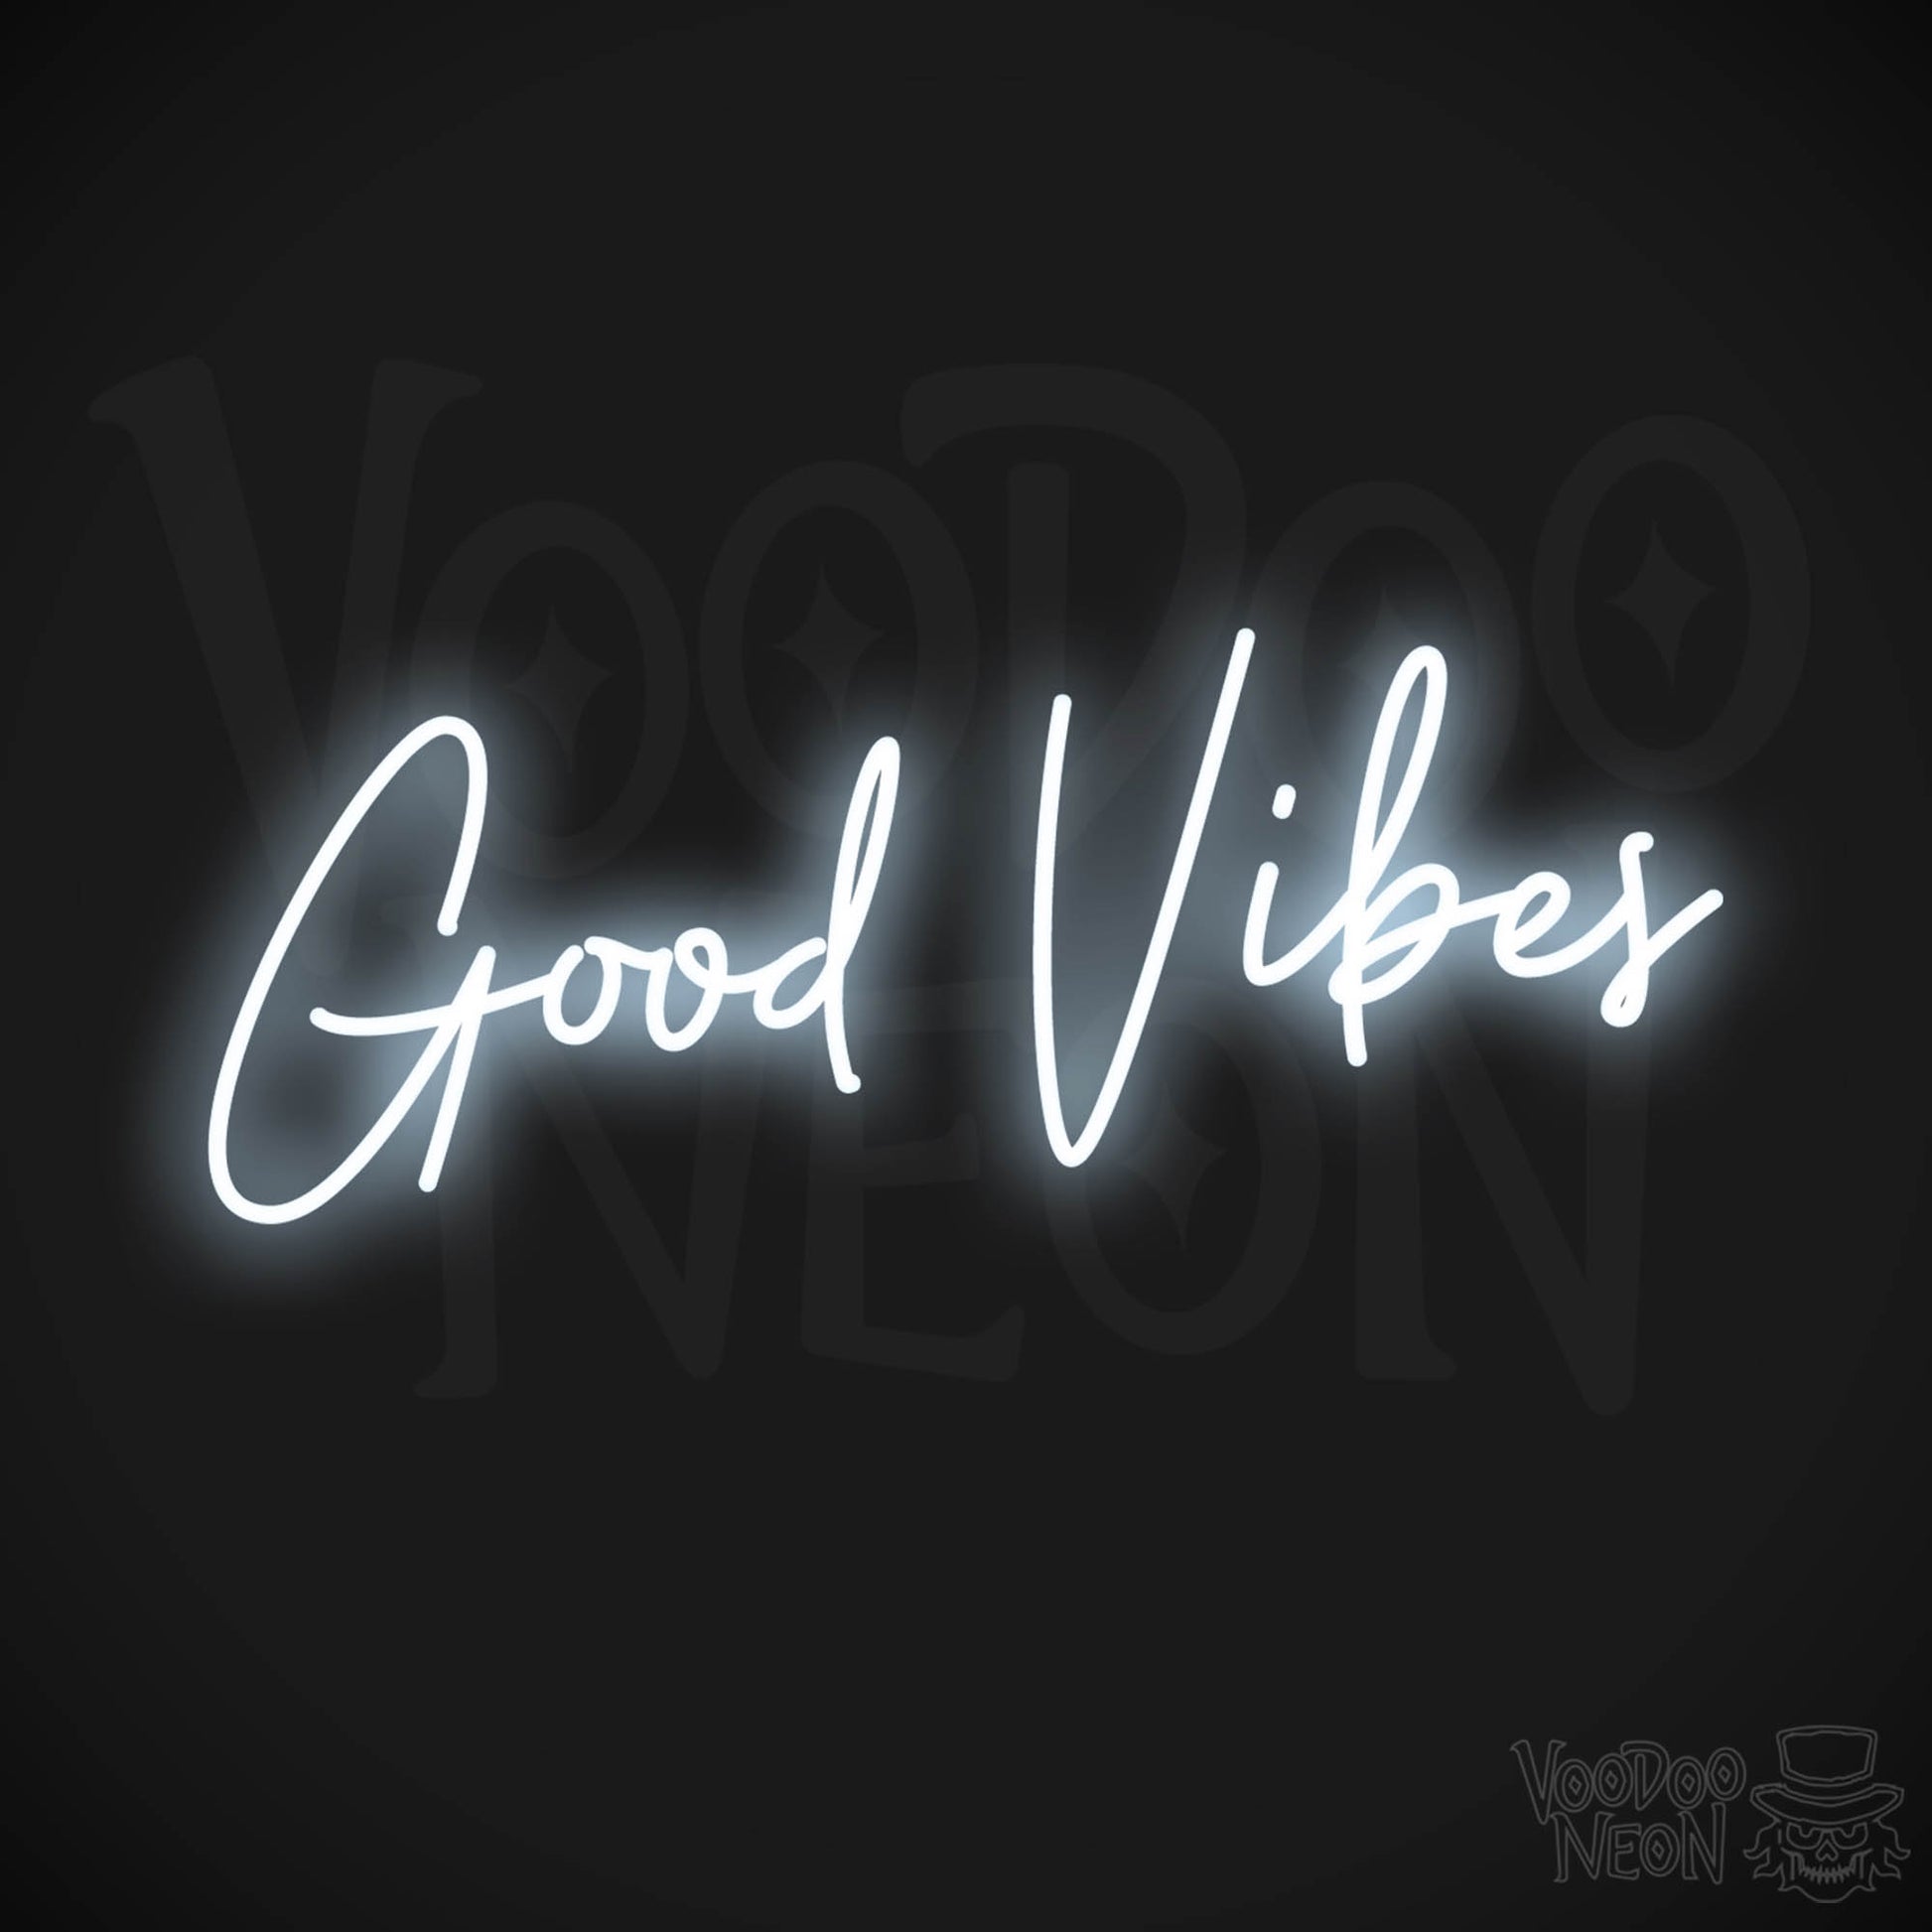 Good Vibes LED Neon - Cool White